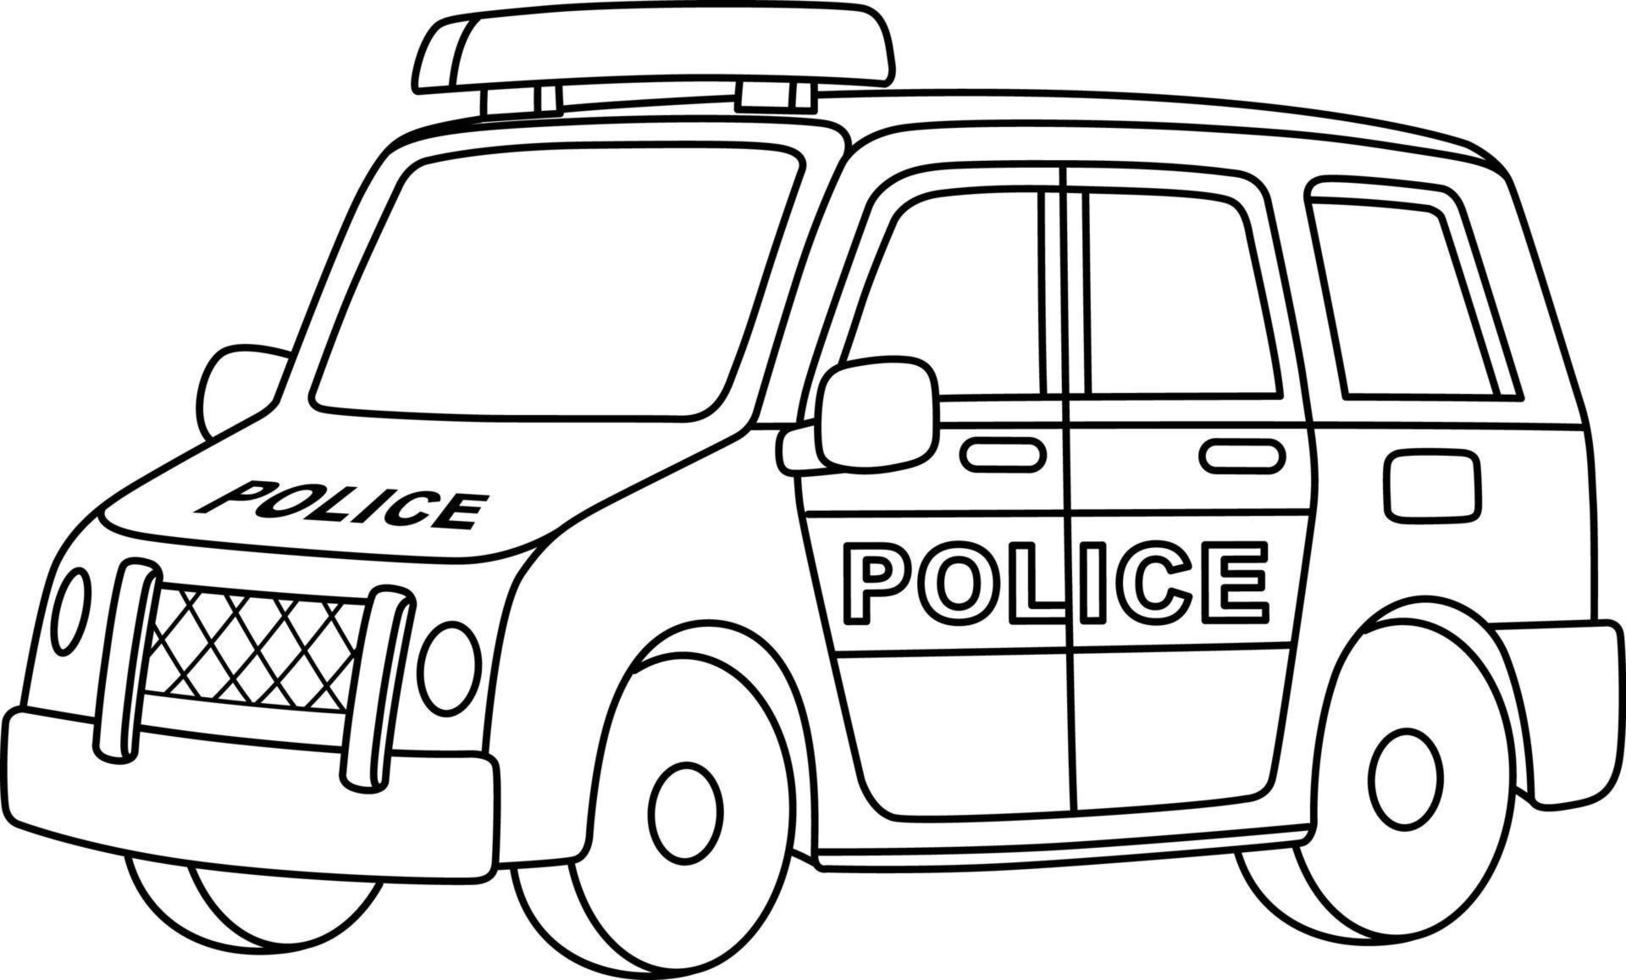 Police Car Isolated Coloring Page for Kids vector